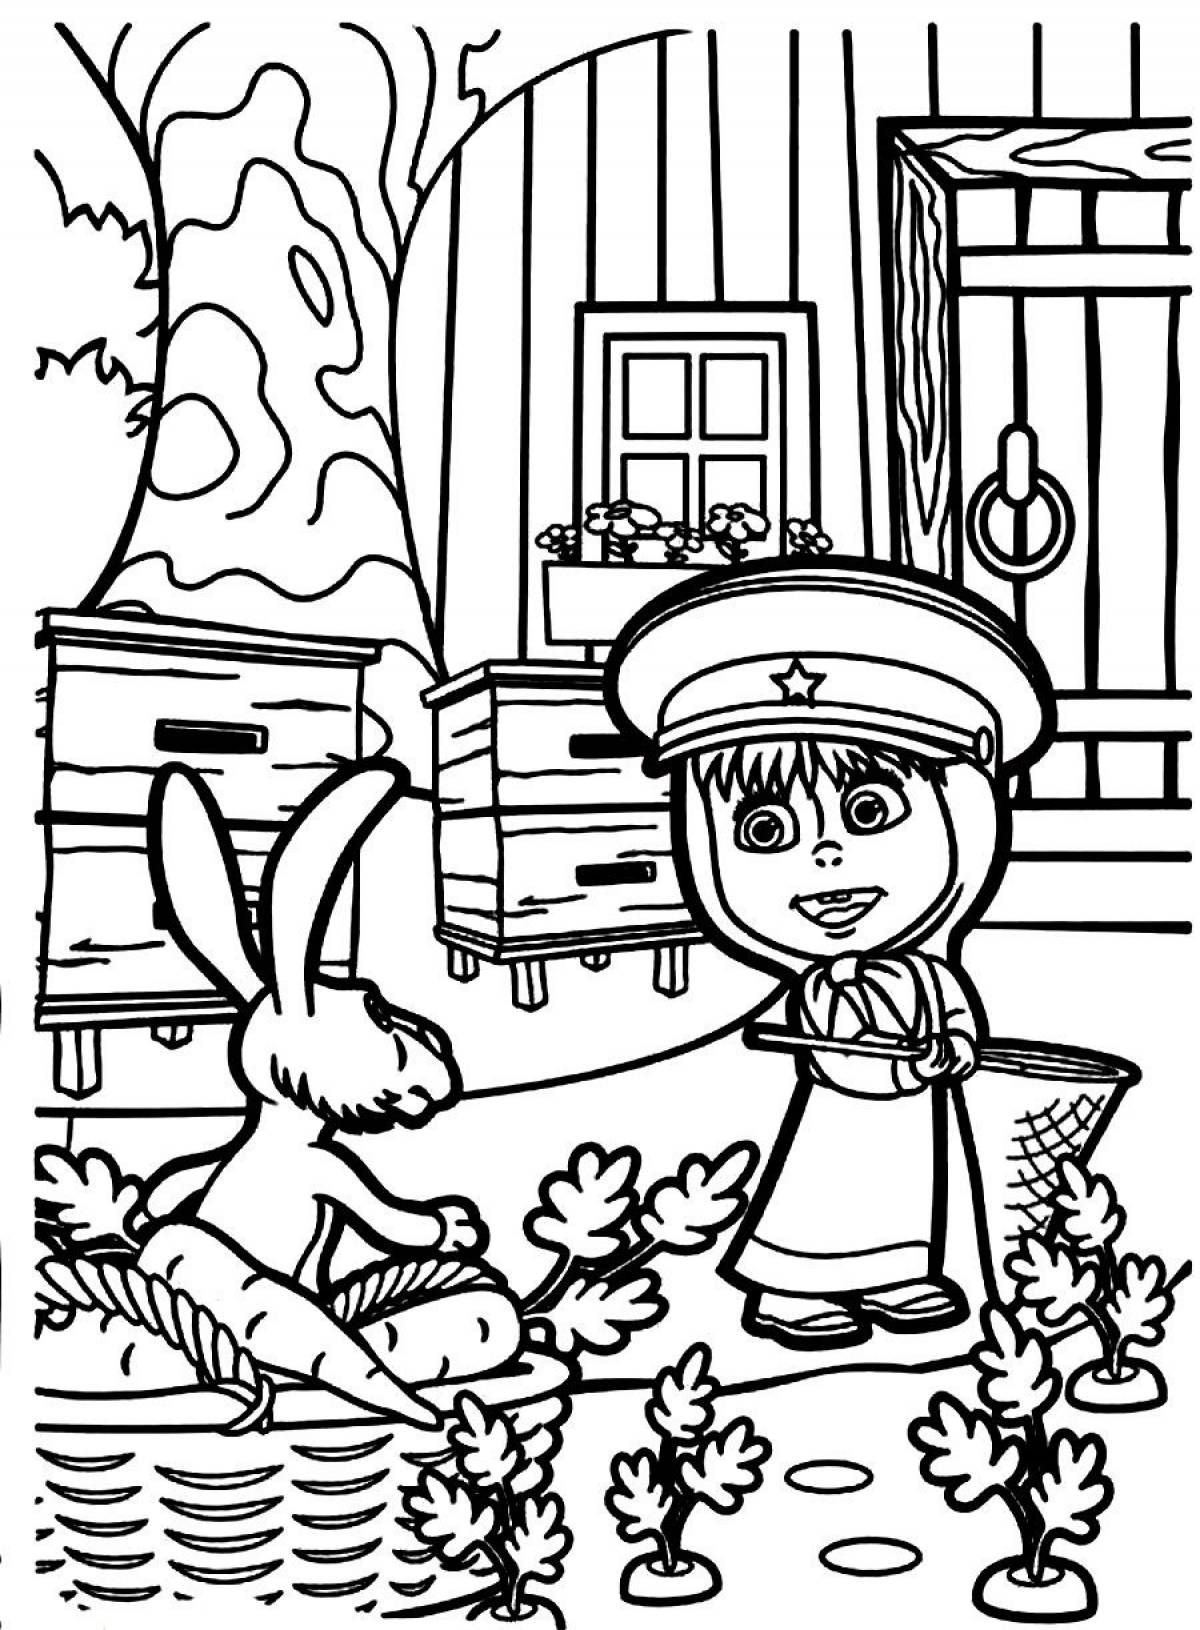 Masha and the hare coloring page